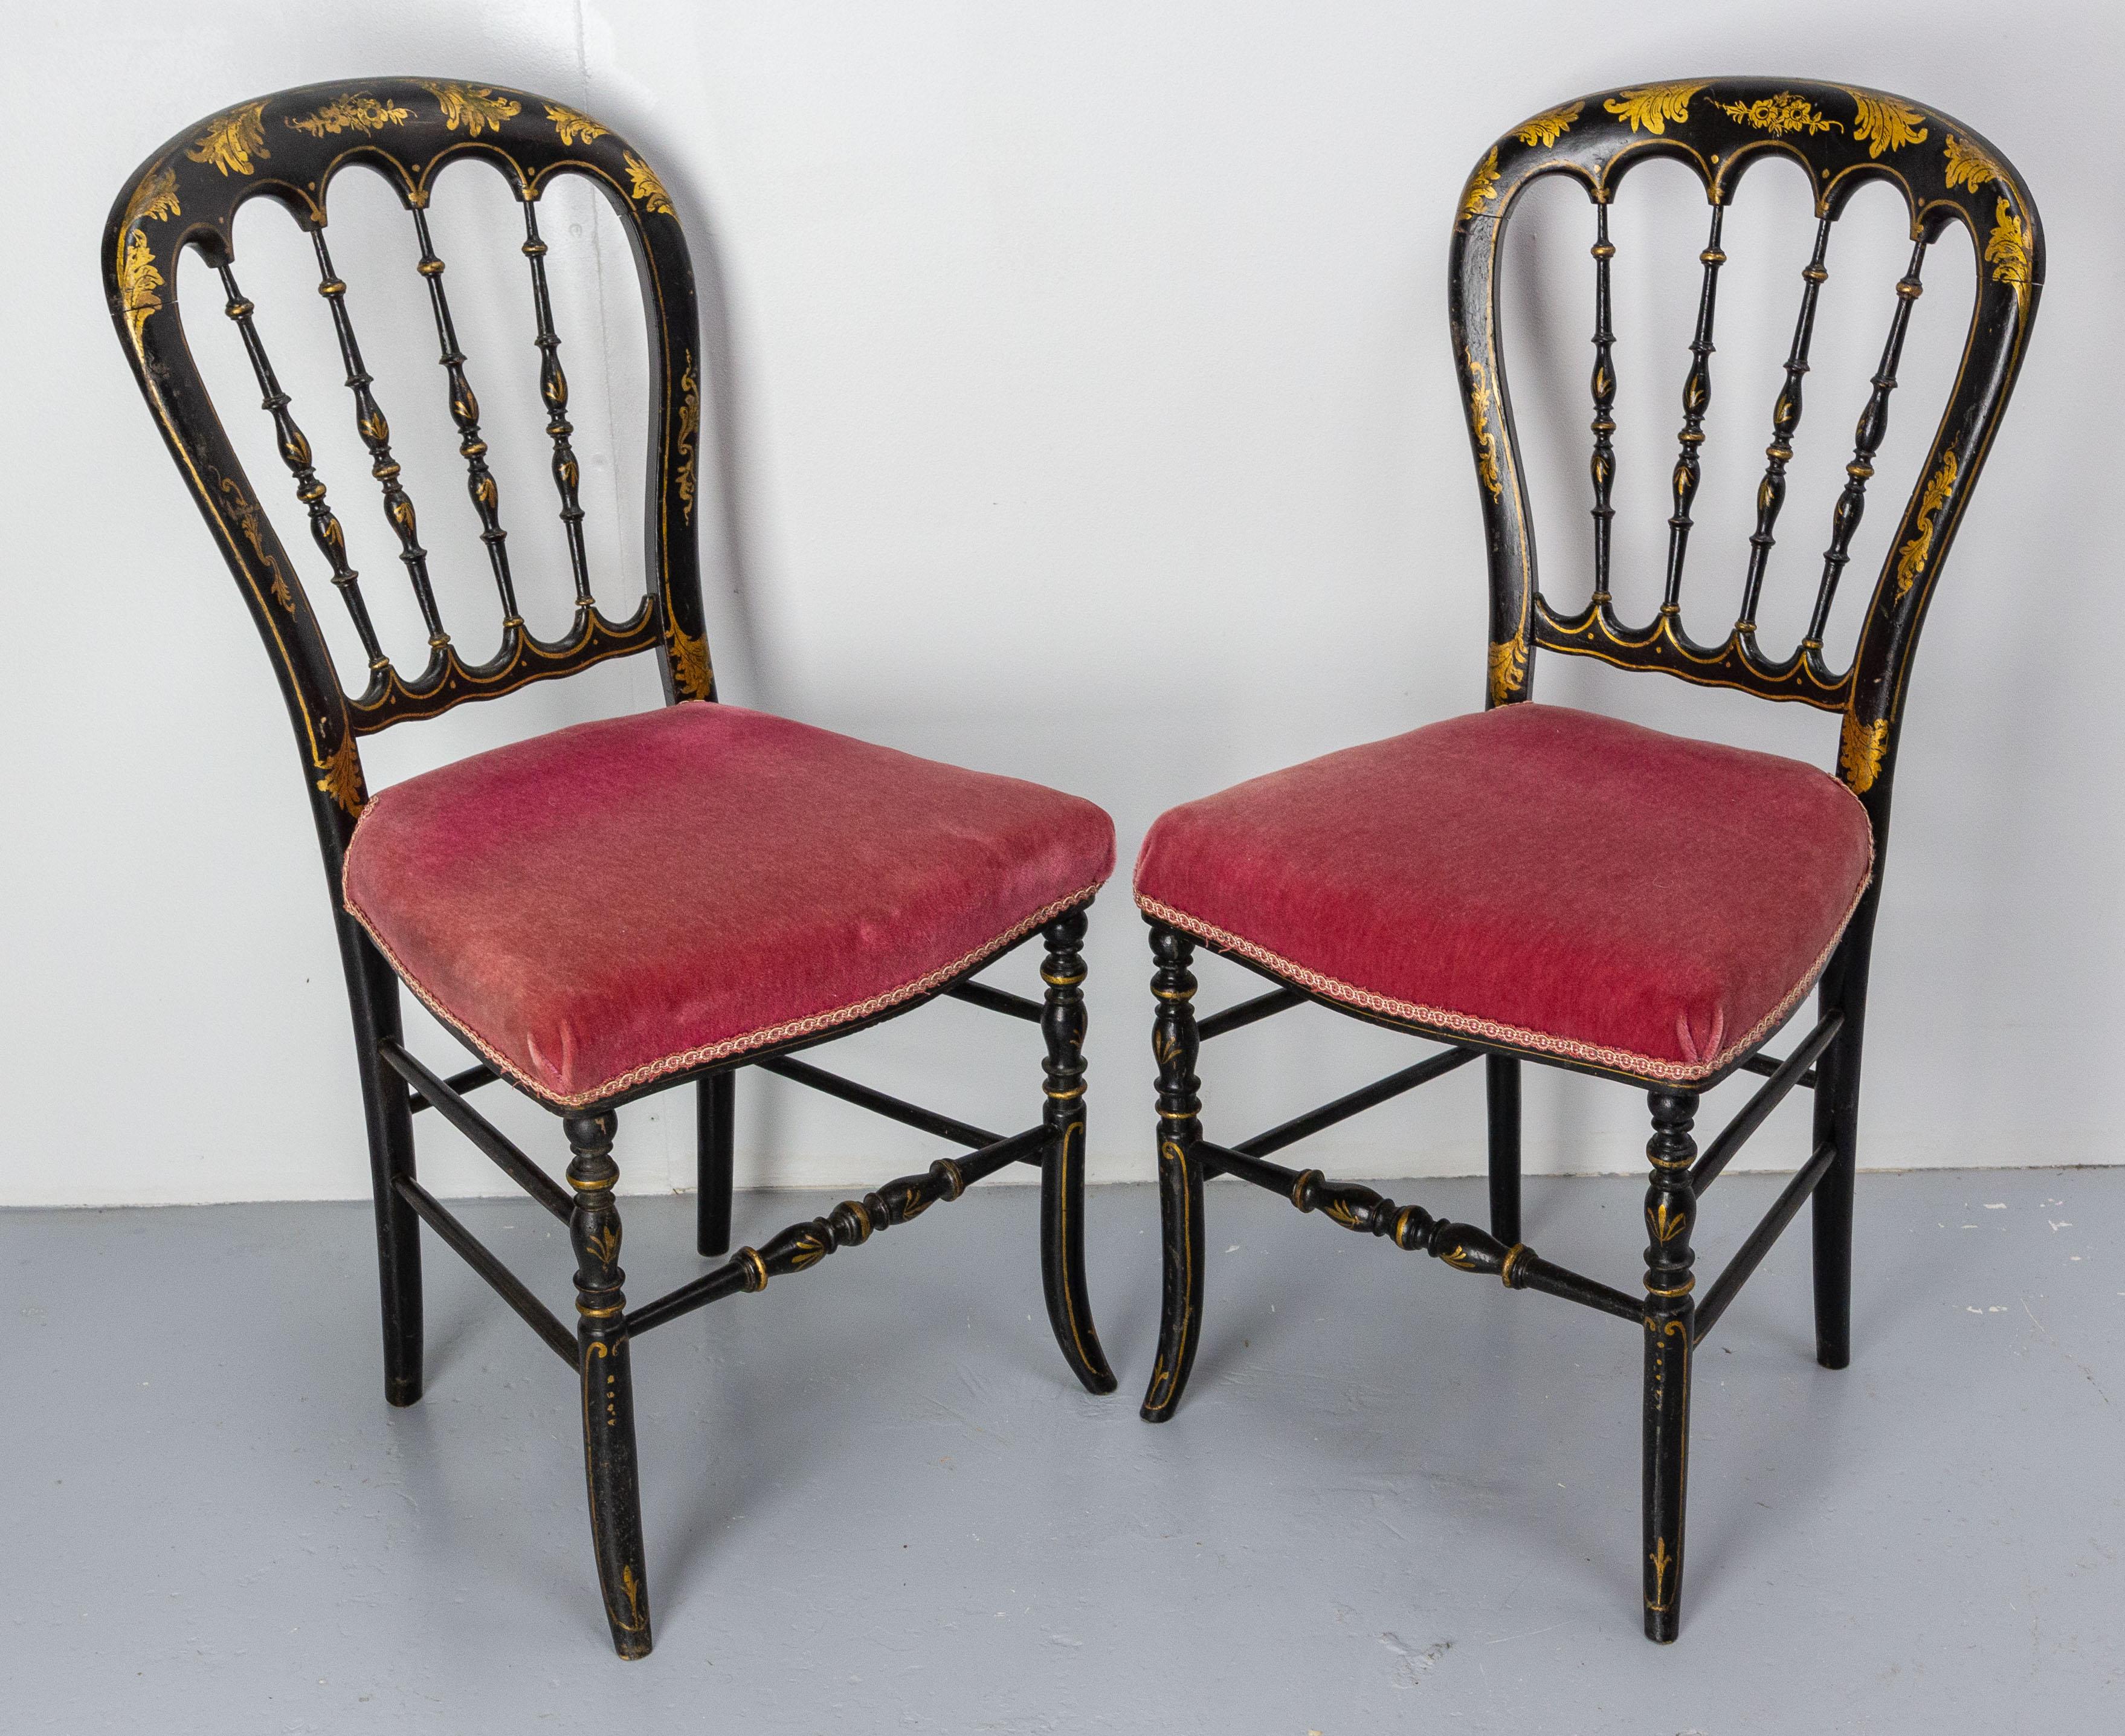 French Pair of Napoleon III, circa 1880.
Black painting with gilded vegetal motifs
Antique, late 19th century.
It can be recovered with the fabric of your choice to suit your interior, but the chairs can be used in the actual condition
Sound and